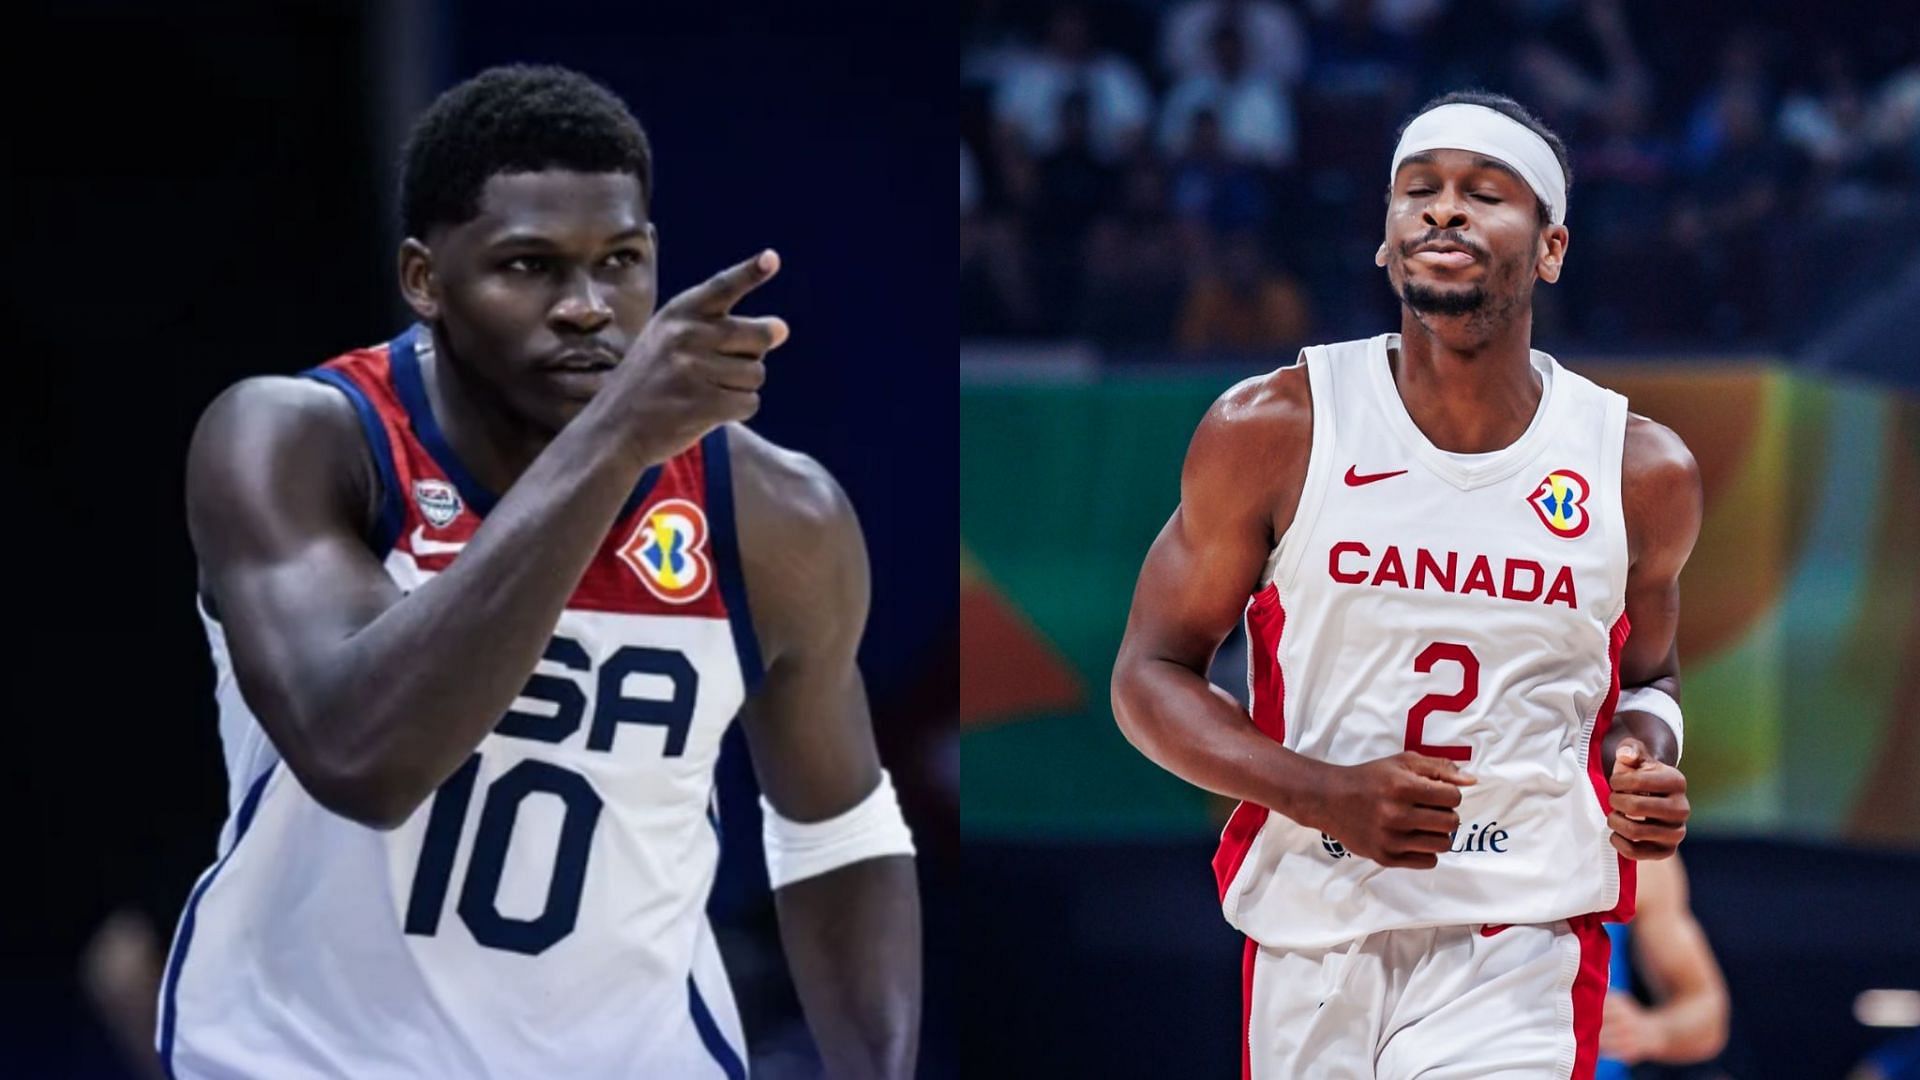 USA will face Canada in the bronze-medal match